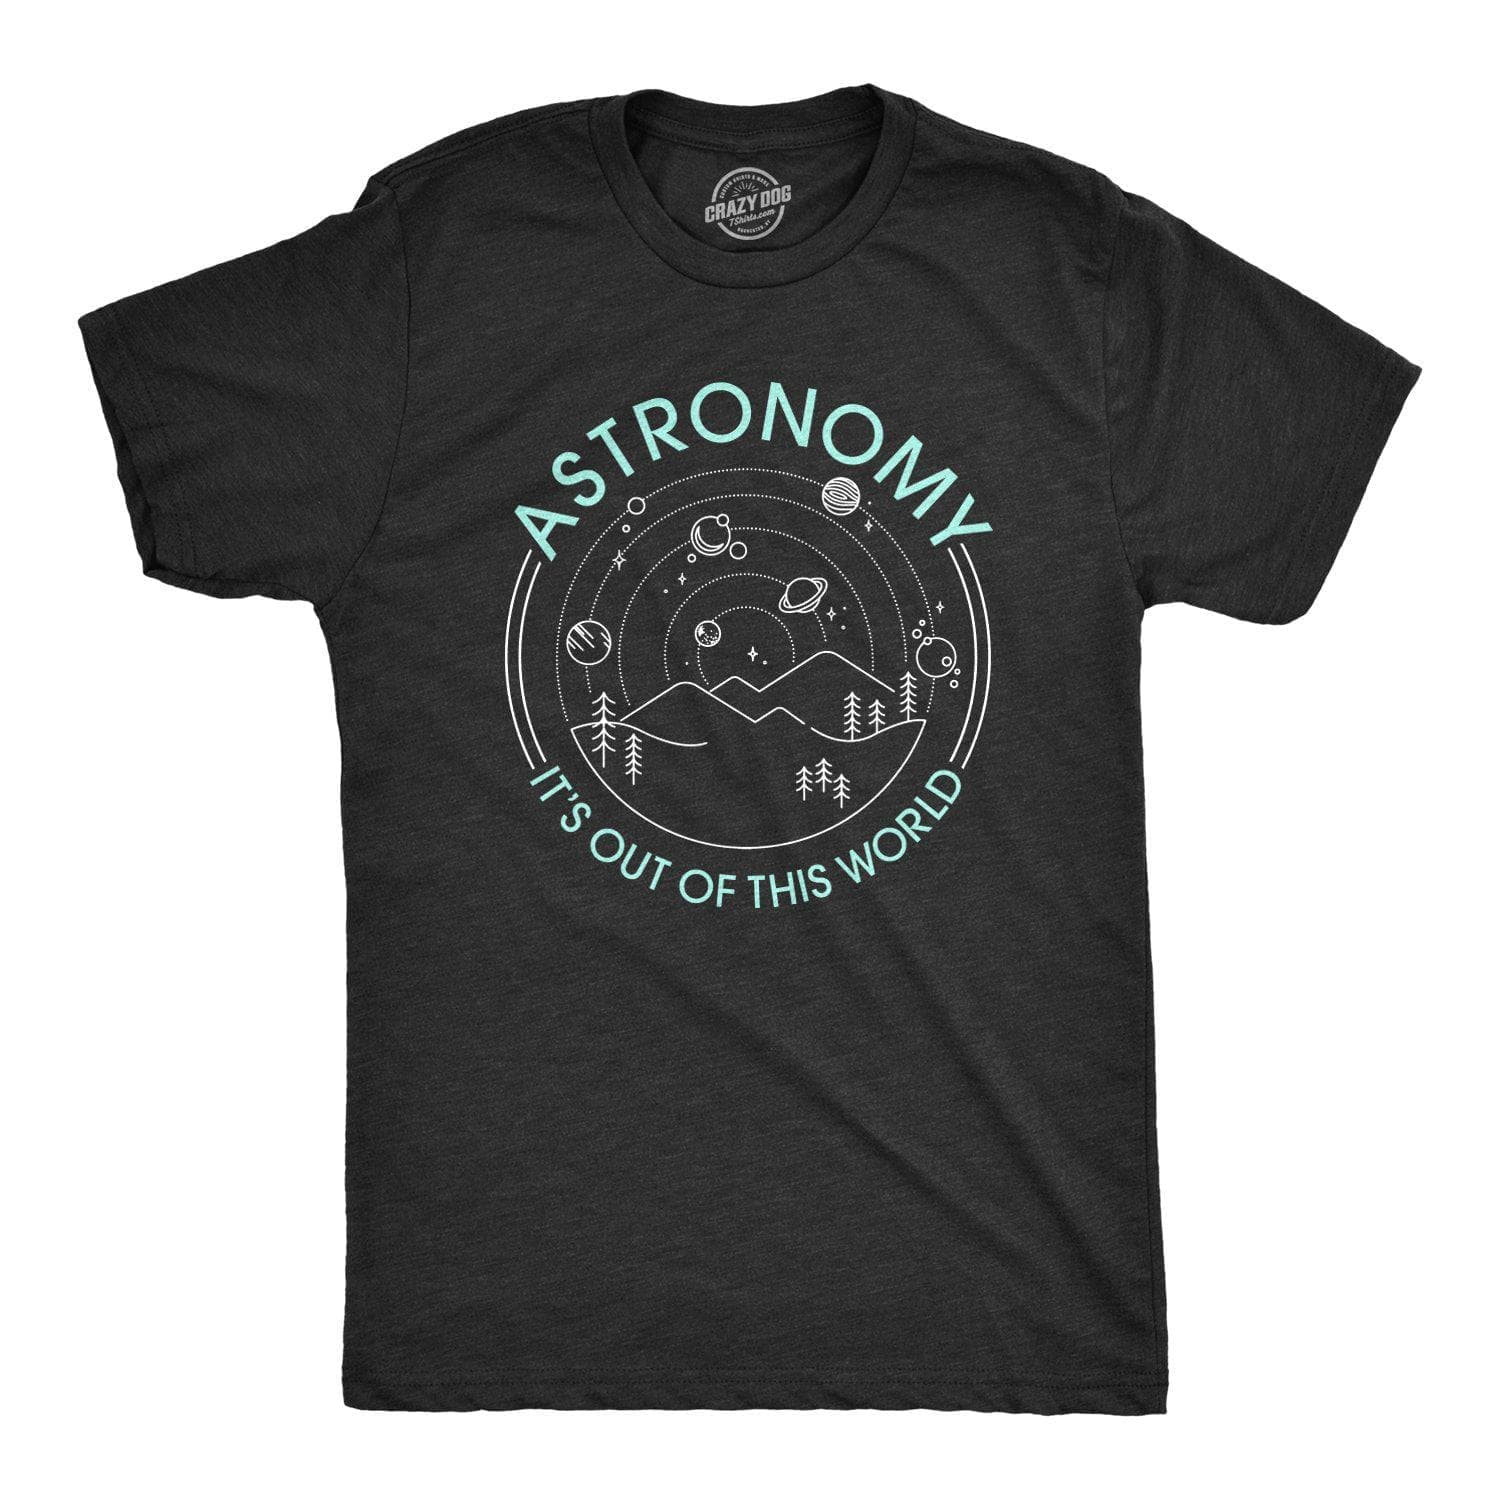 Astronomy It's Out Of This World Men's Tshirt - Crazy Dog T-Shirts